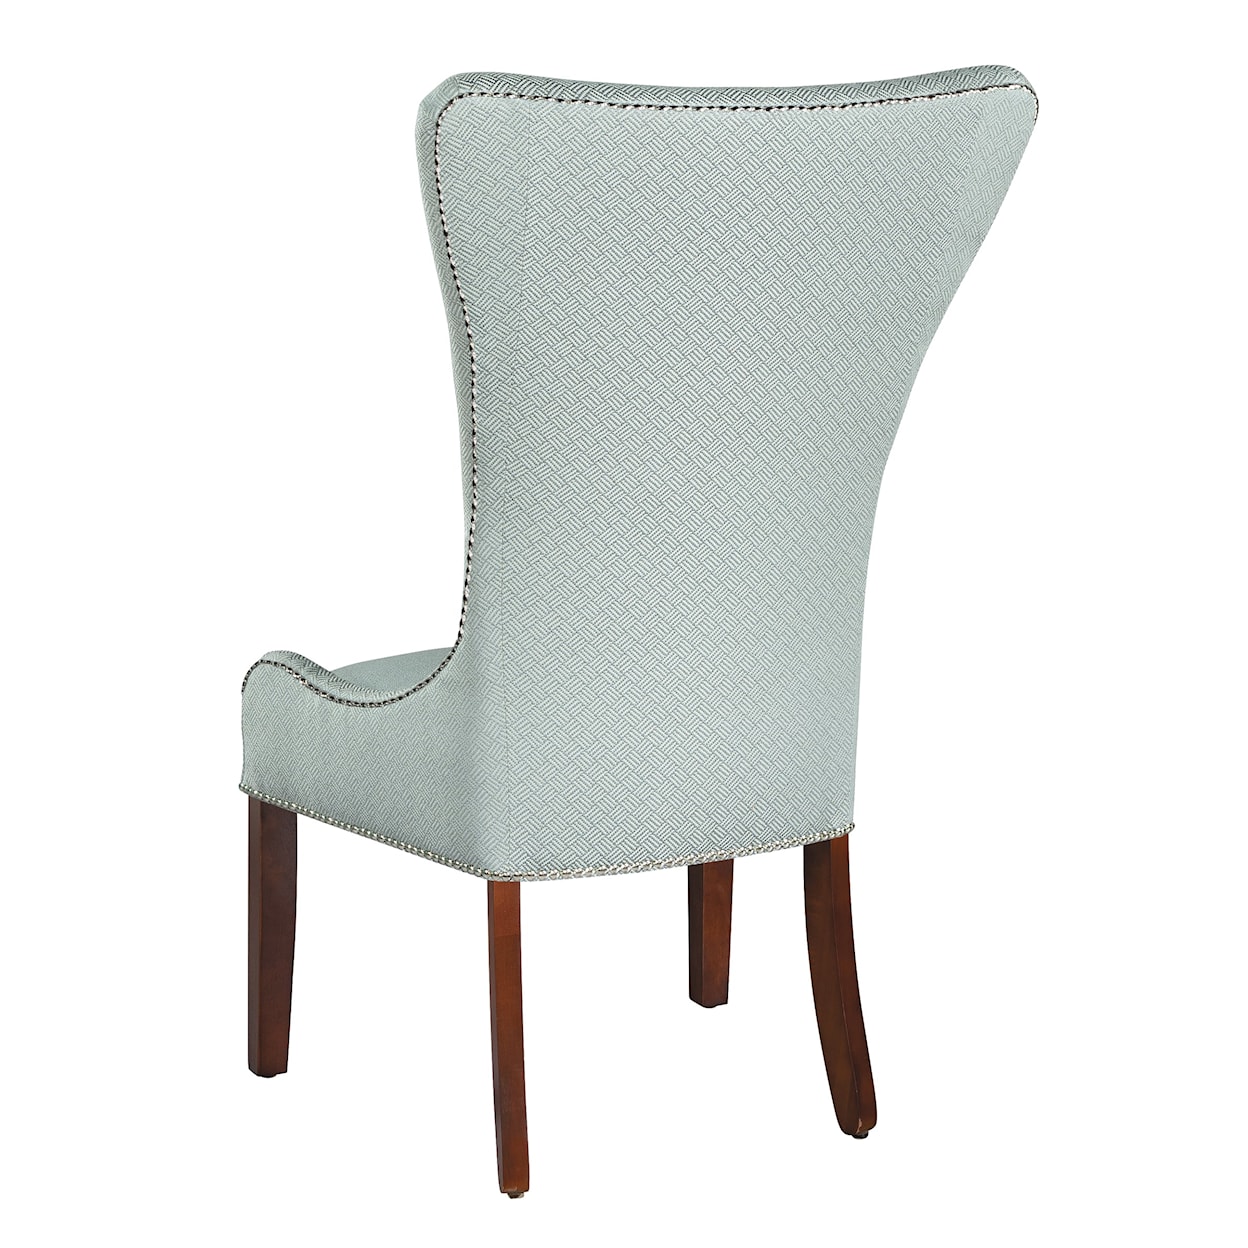 Hekman Upholstery Christine Hostess Chair with Nailheads